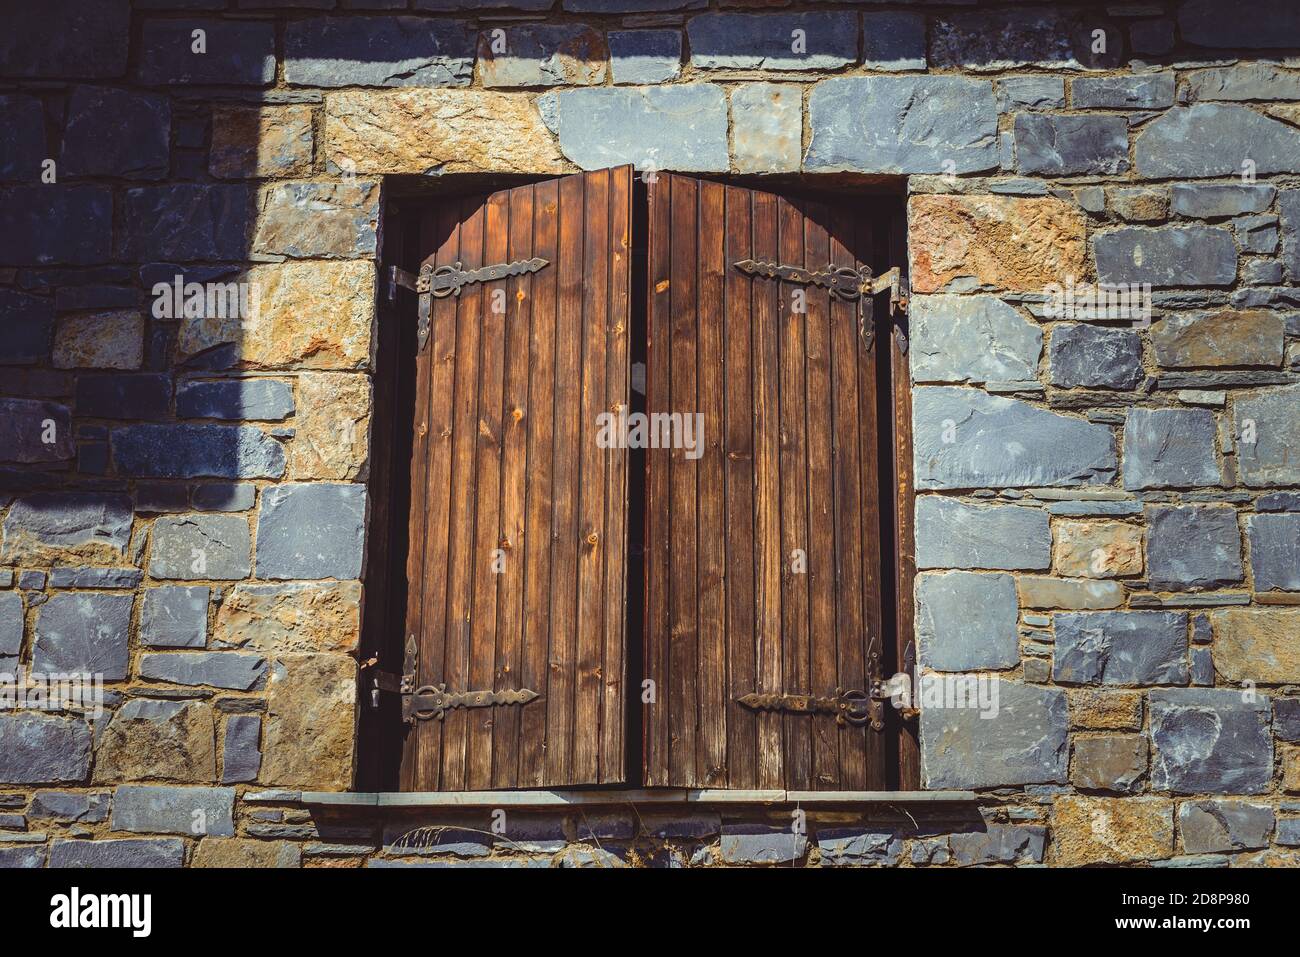 Wooden window closed on a brick wall. wooden shutters. History concept Stock Photo